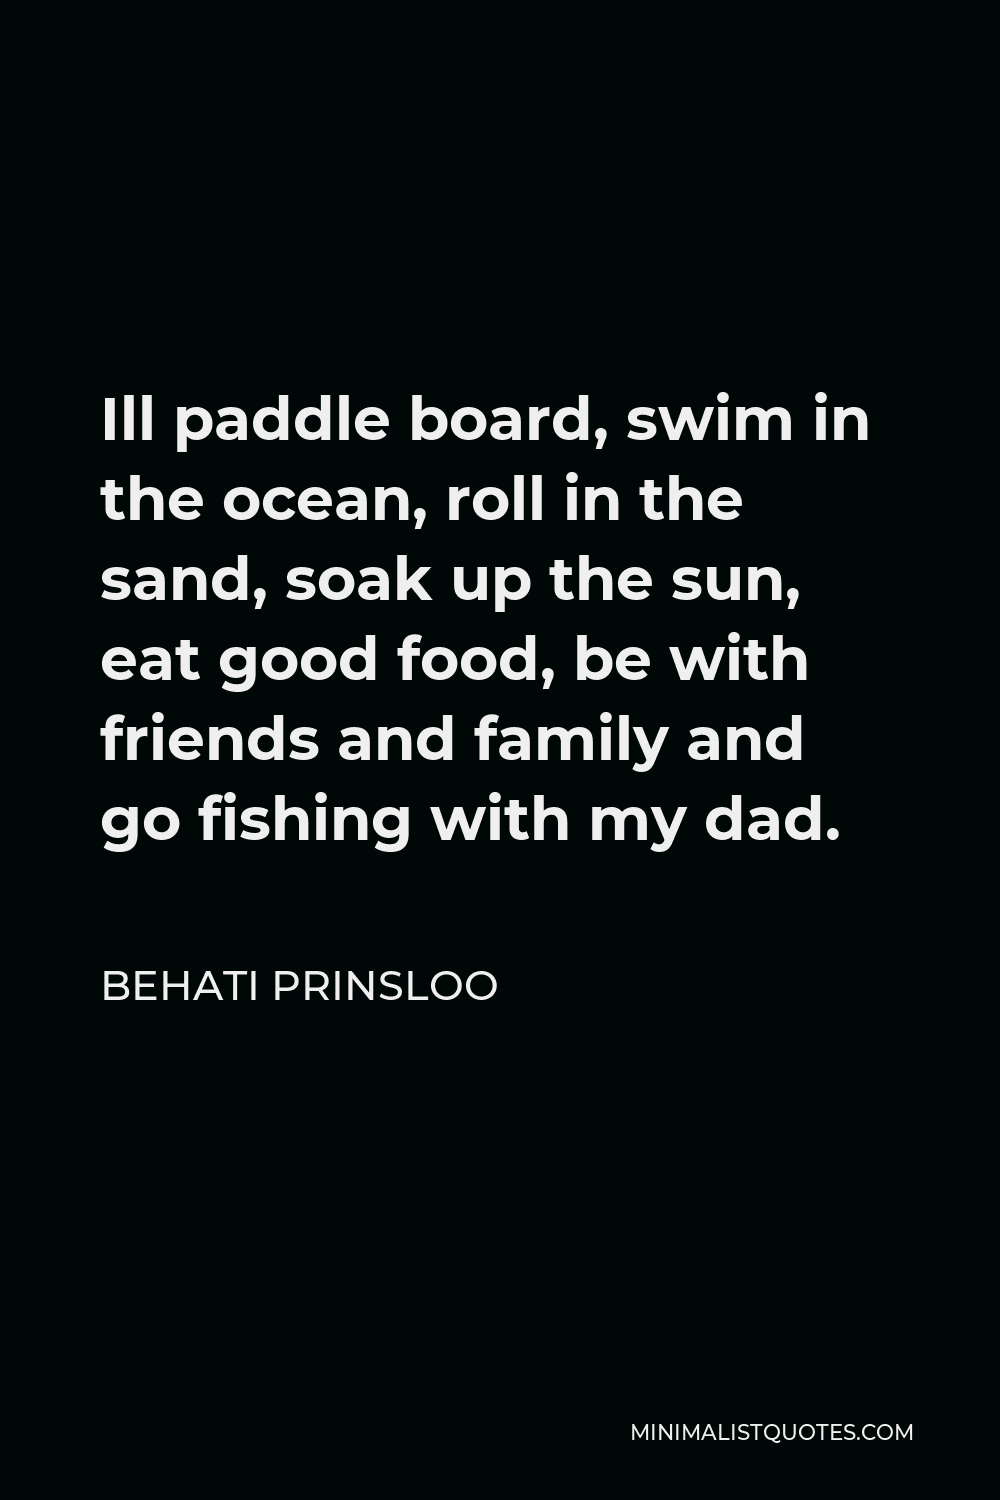 Behati Prinsloo Quote - Ill paddle board, swim in the ocean, roll in the sand, soak up the sun, eat good food, be with friends and family and go fishing with my dad.